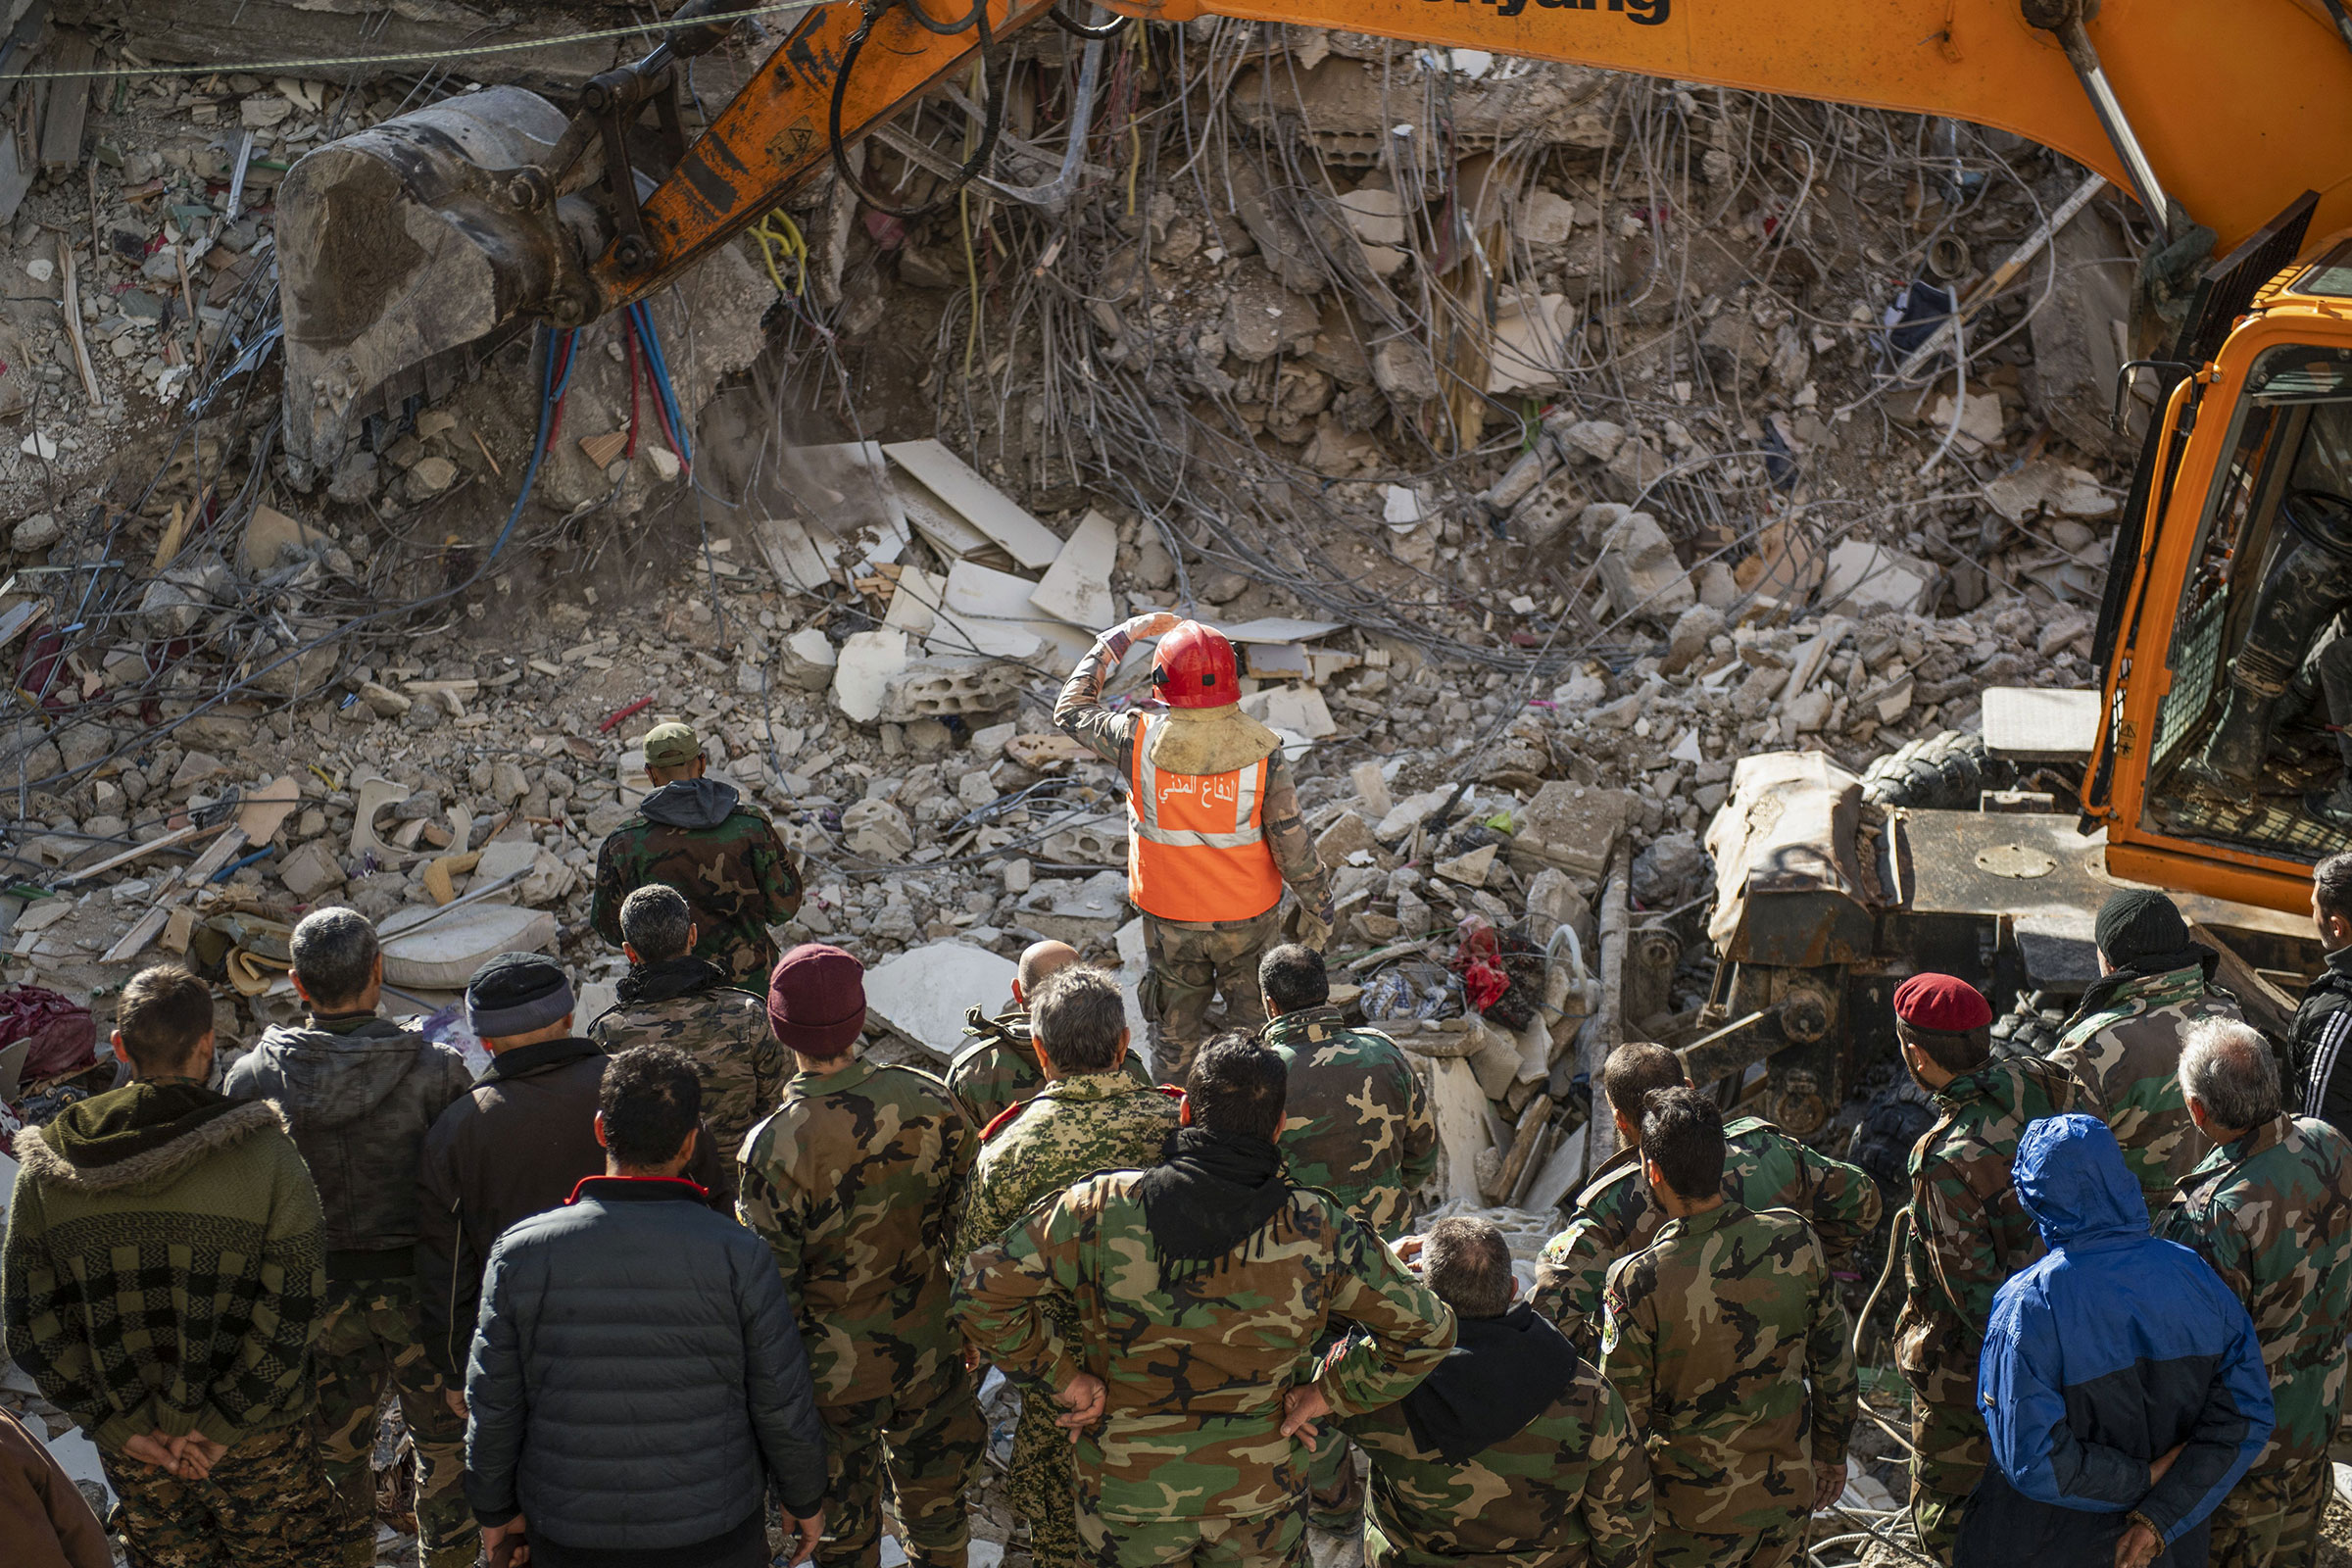 Rescue workers search for survivors in the rubble of a collapsed building in the town of Jableh in Syria's northwestern province of Latakia following an earthquake, on Feb. 7, 2023. (AFP/Getty Images)